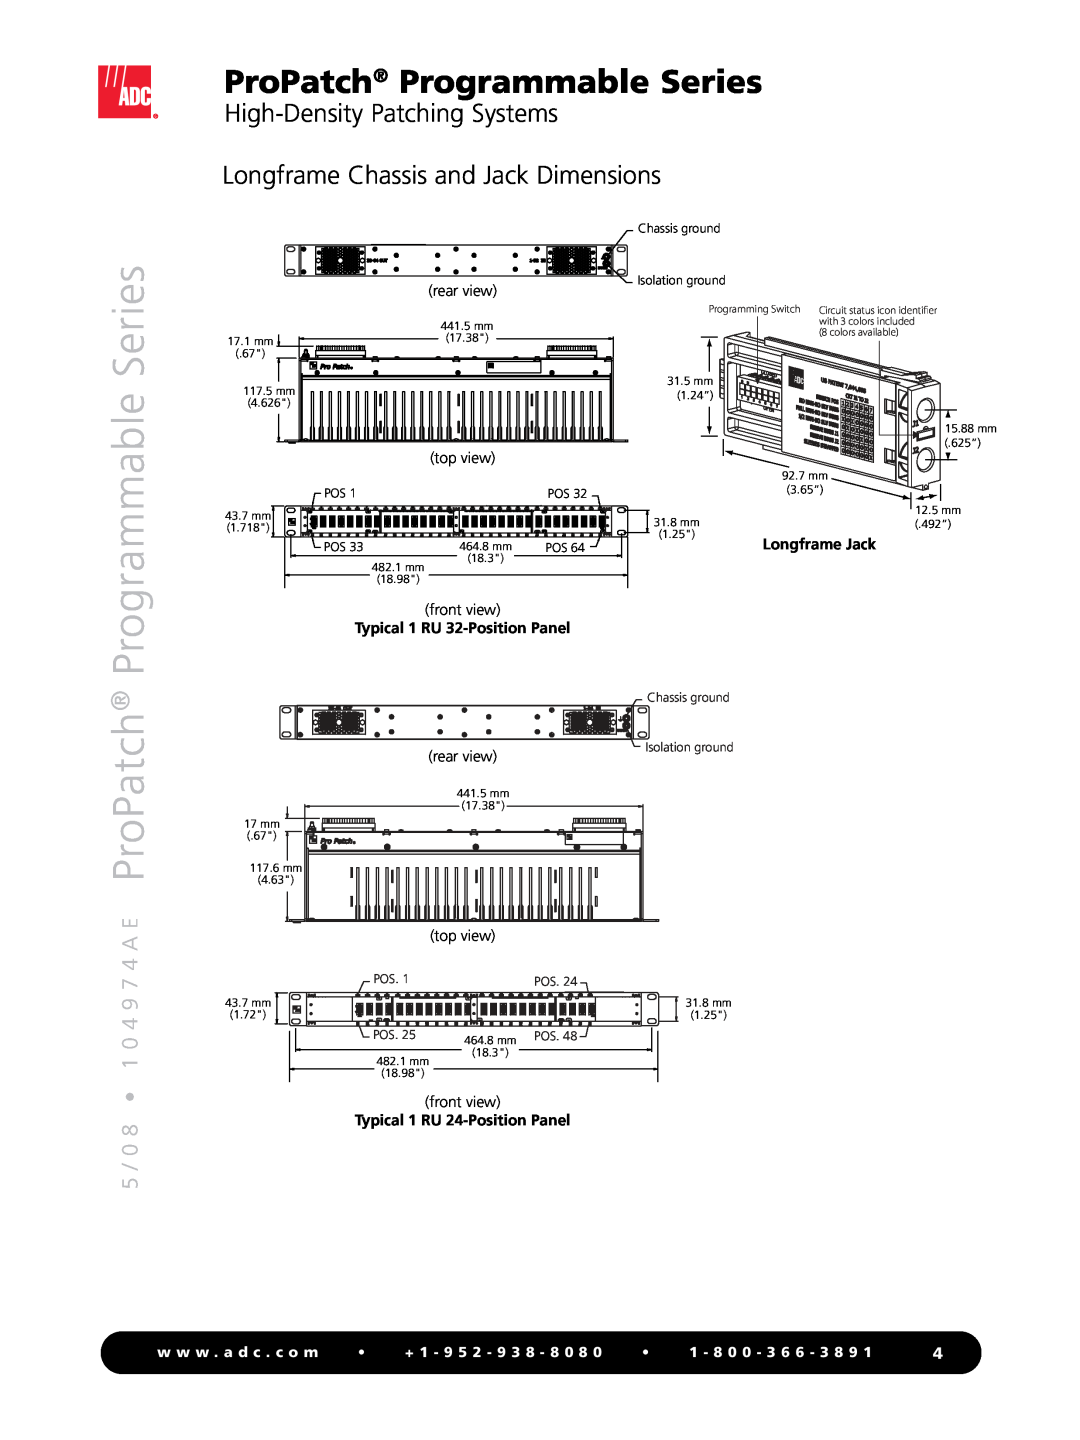 ADC High-Density Patching Systems Longframe Chassis and Jack Dimensions, ProPatch Programmable Series, rear view, 1.72 